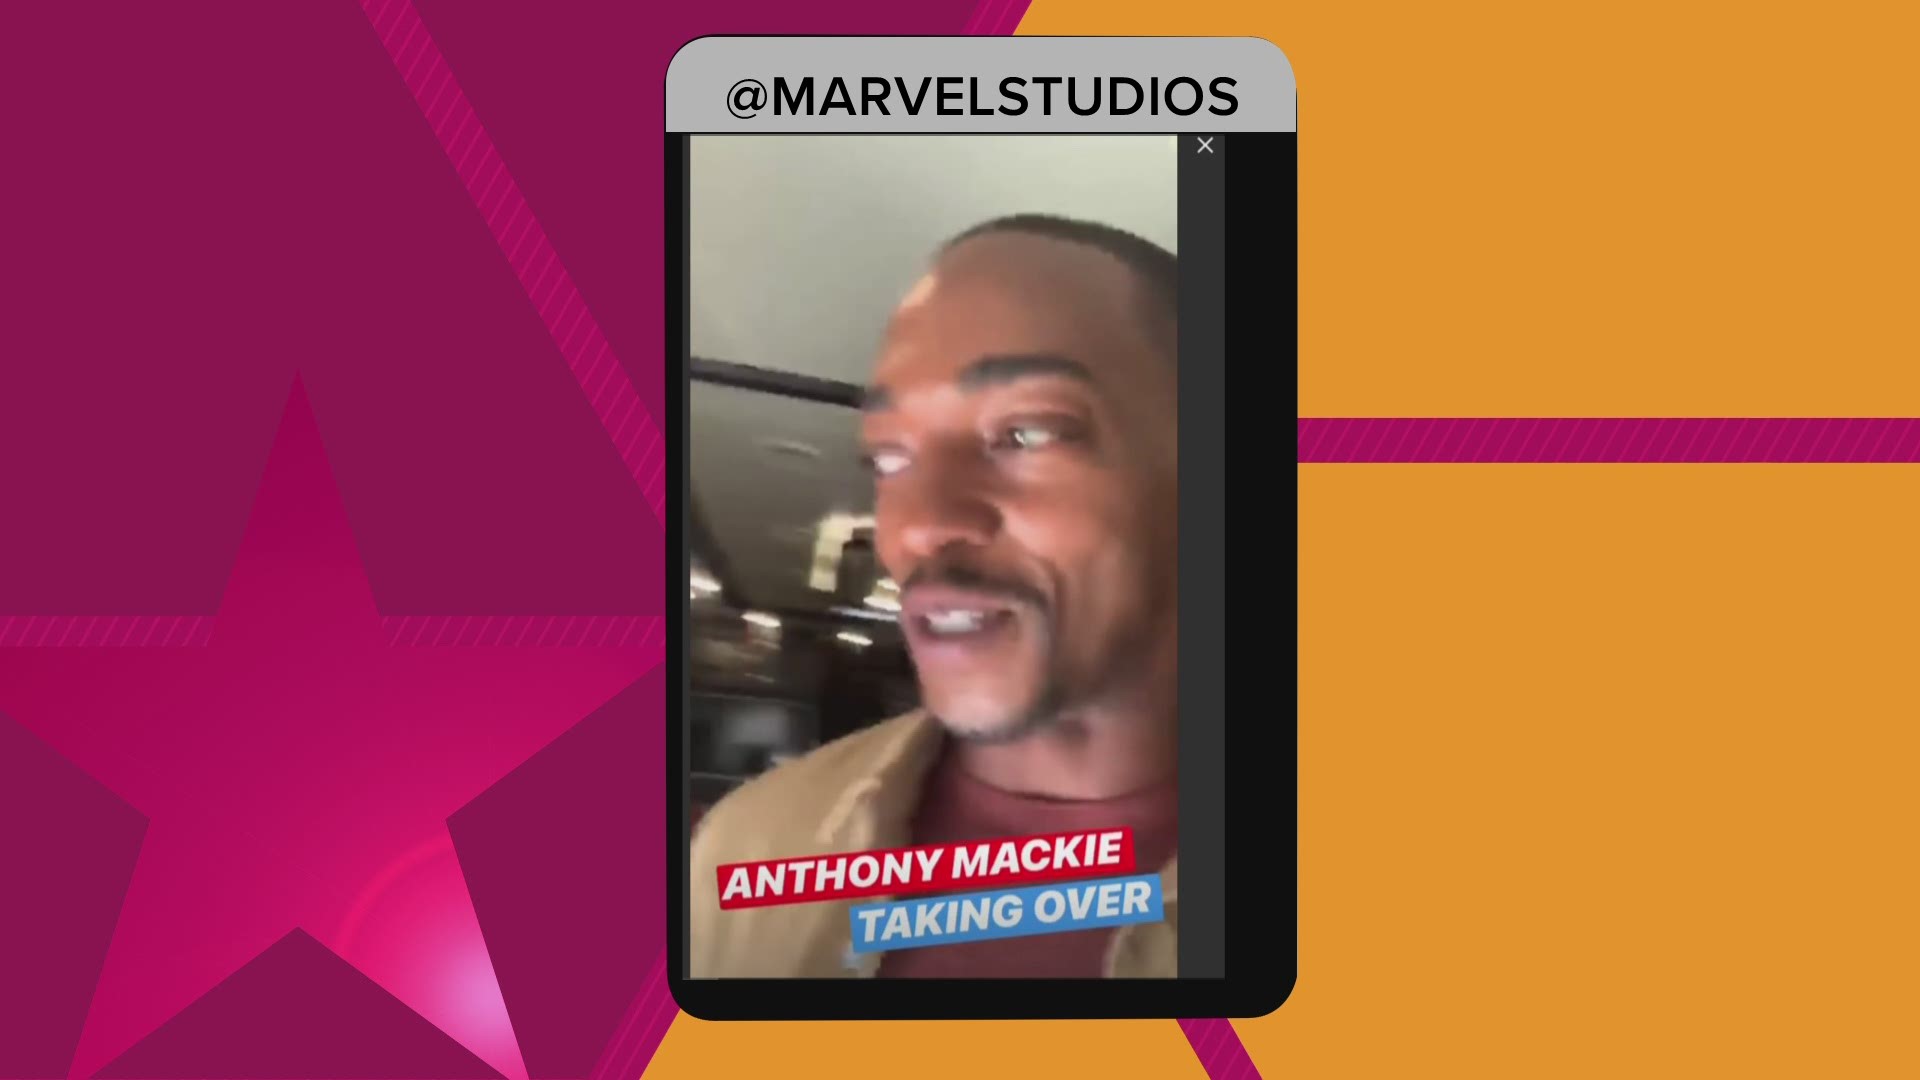 Actors Sebastian Stan and Anthony Mackie, who star as Bucky Barnes/Winter Soldier and Sam Wilson/Falcon took over Marvel's Instagram account.